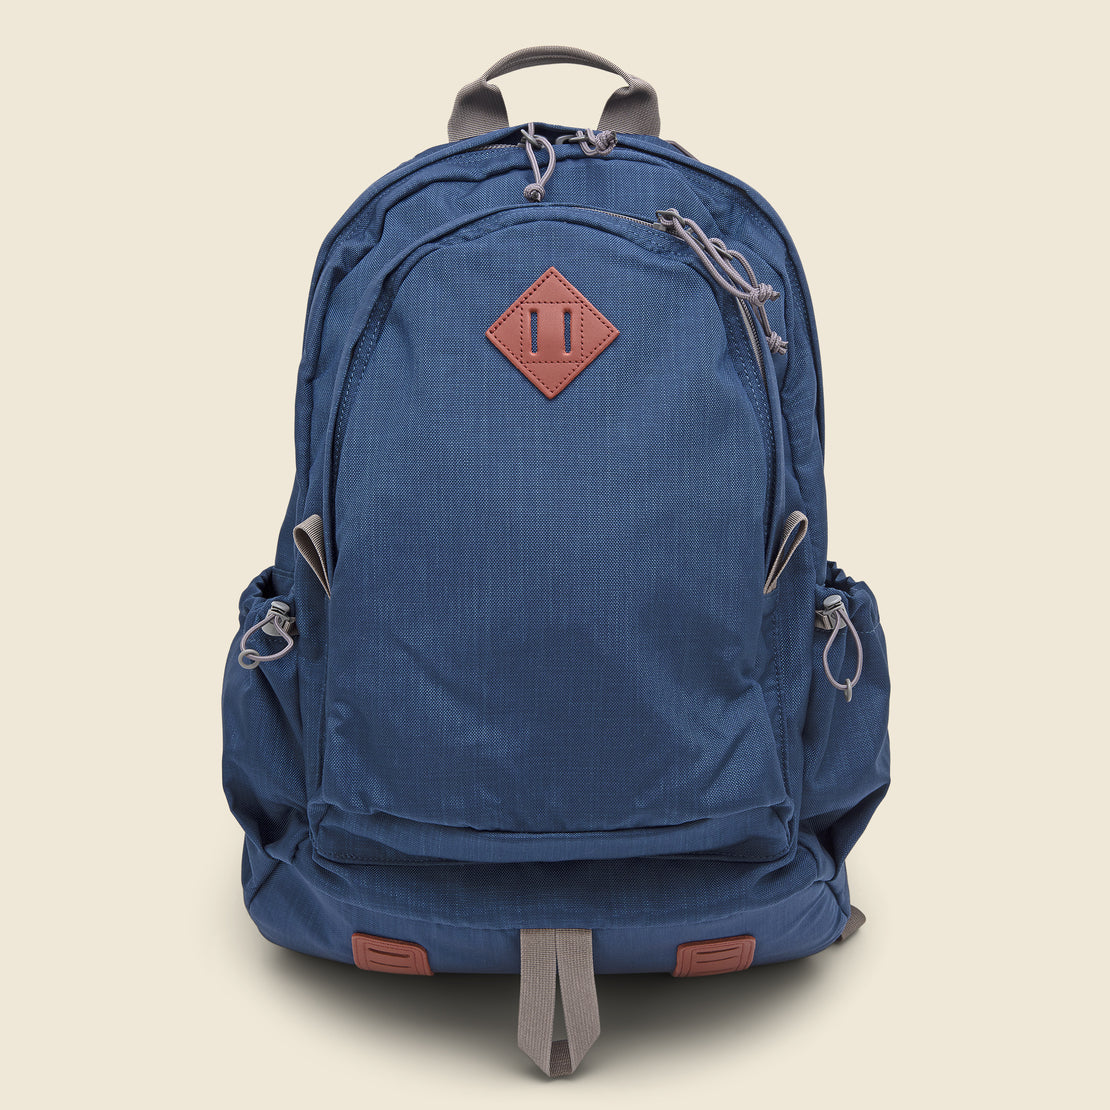 BEAMS+ 2 Compartment Day Pack - Blue